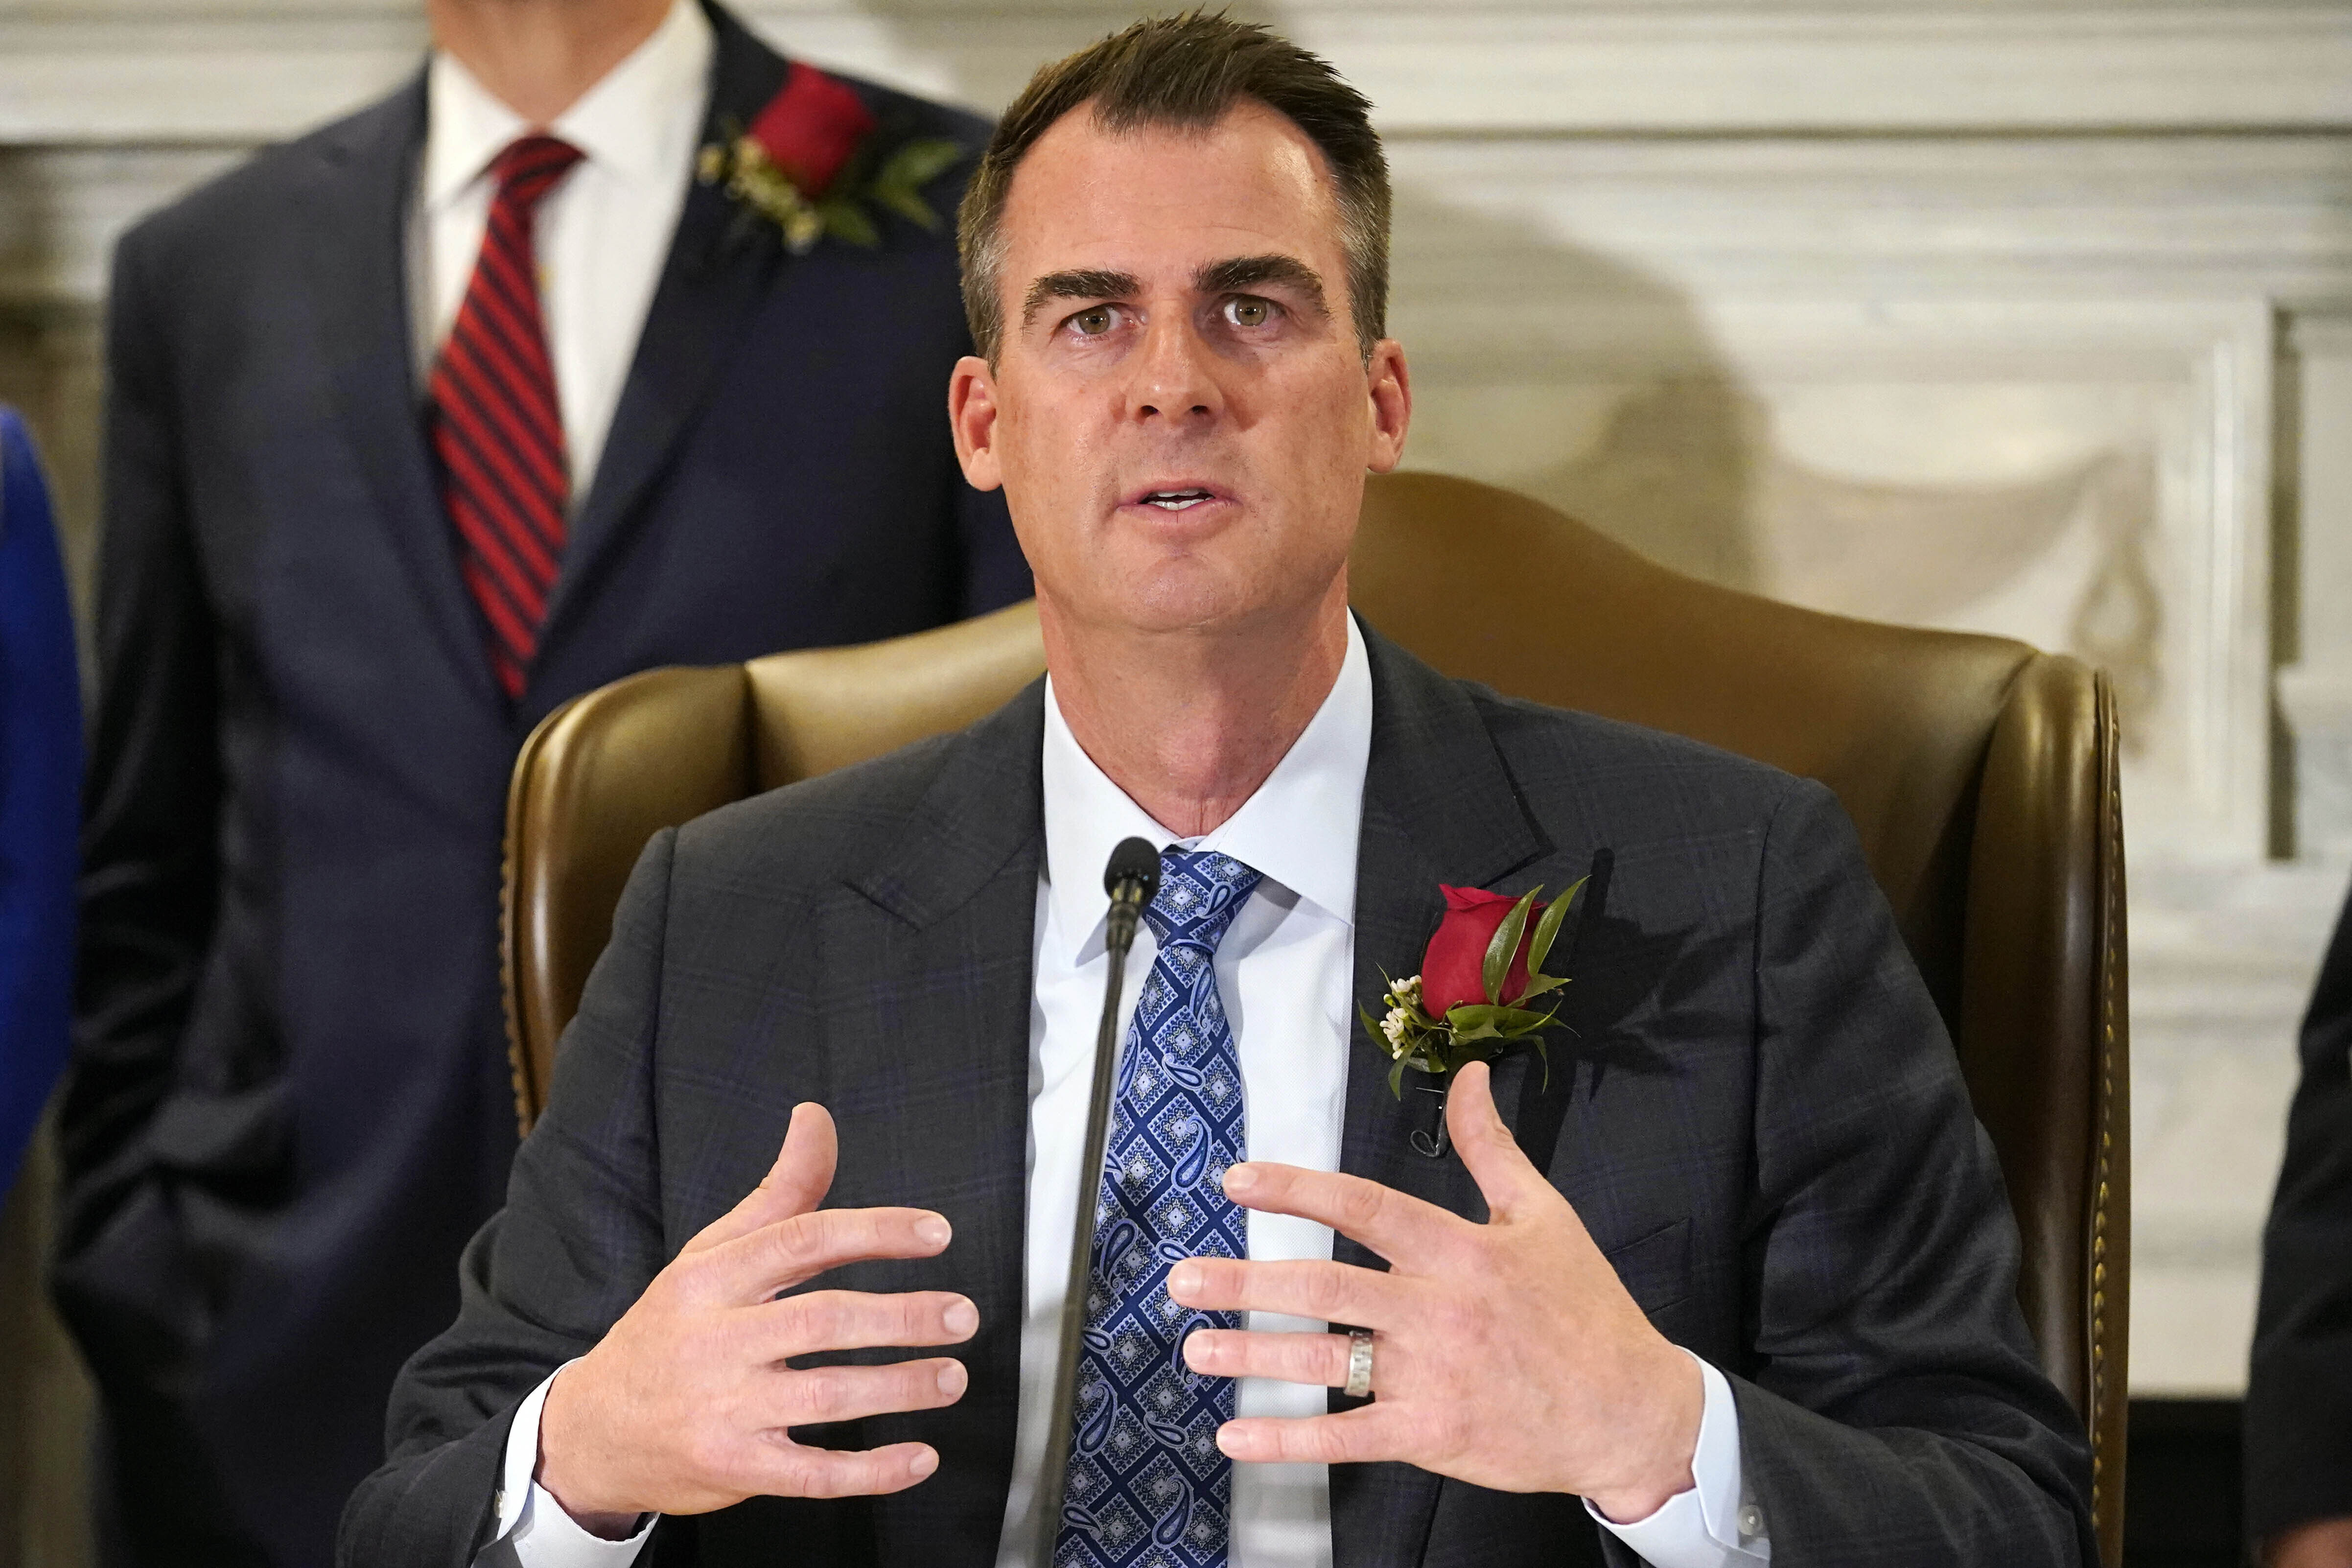 FILE - Oklahoma Gov. Kevin Stitt speaks, April 12, 2022, in Oklahoma City. The Oklahoma Legislature is returning Monday, June 13, to the Capitol for a special session to consider tax cuts the governor wants and how to allocate federal COVID-19 relief funds that were part of the American Rescue Plan Act. (AP Photo/Sue Ogrocki, File)